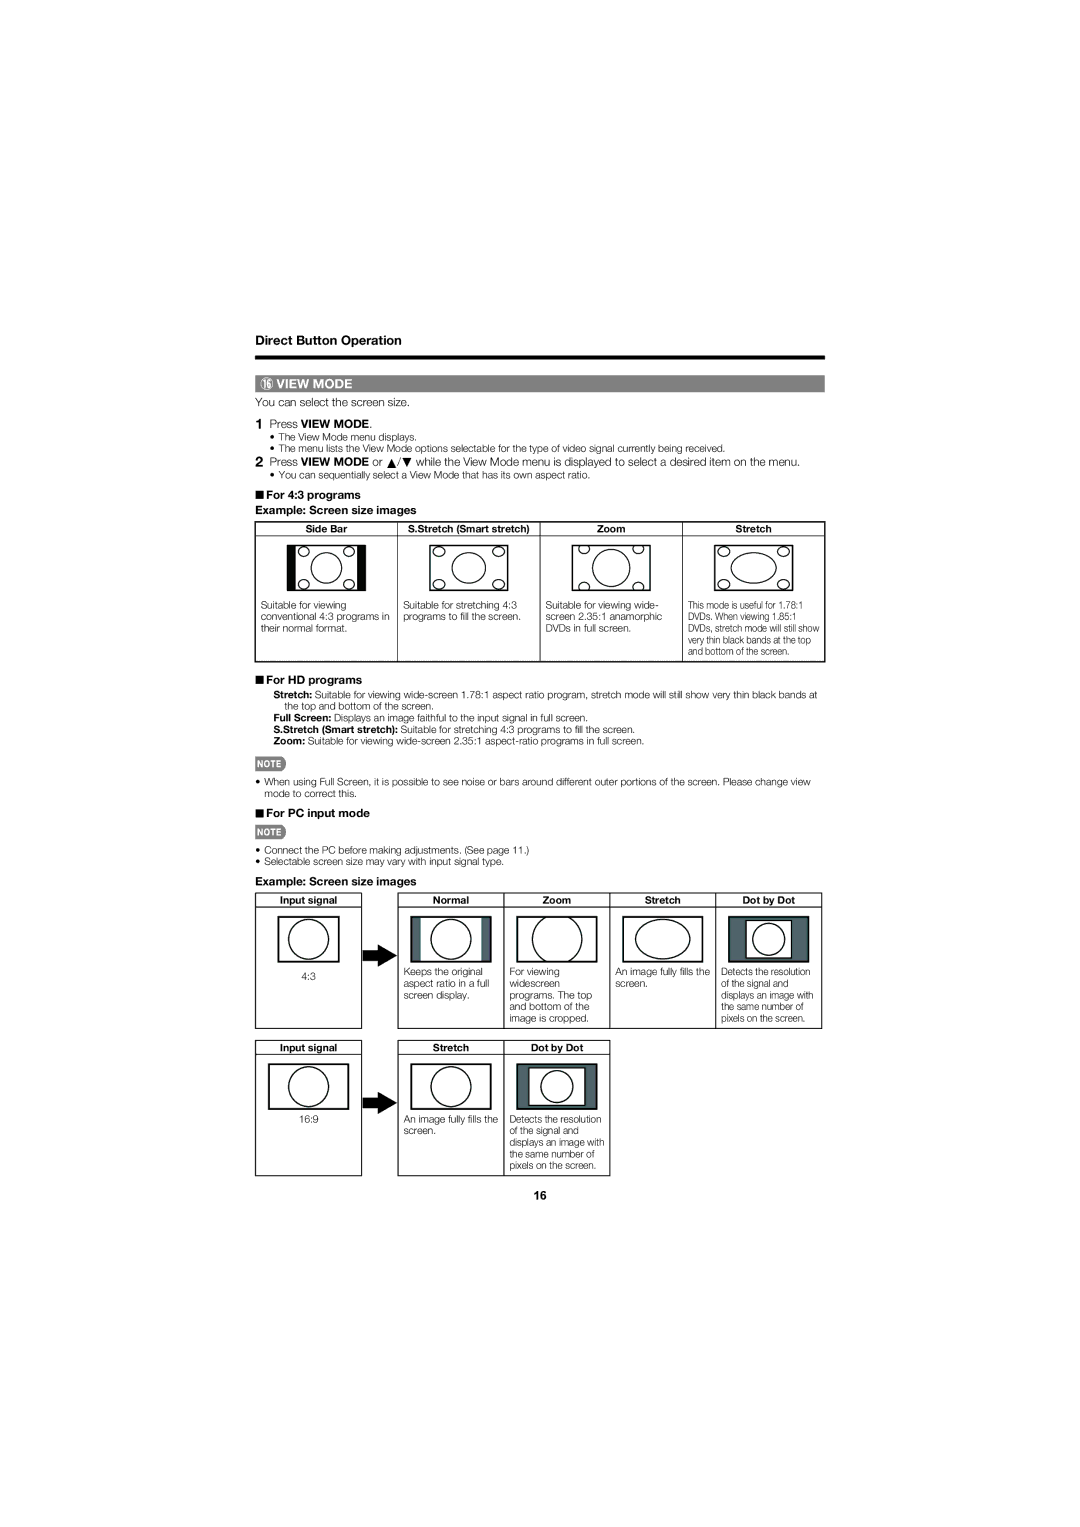 Sharp LC-C3237UT operation manual You can select the screen size, Press View Mode, For HD programs, For PC input mode 